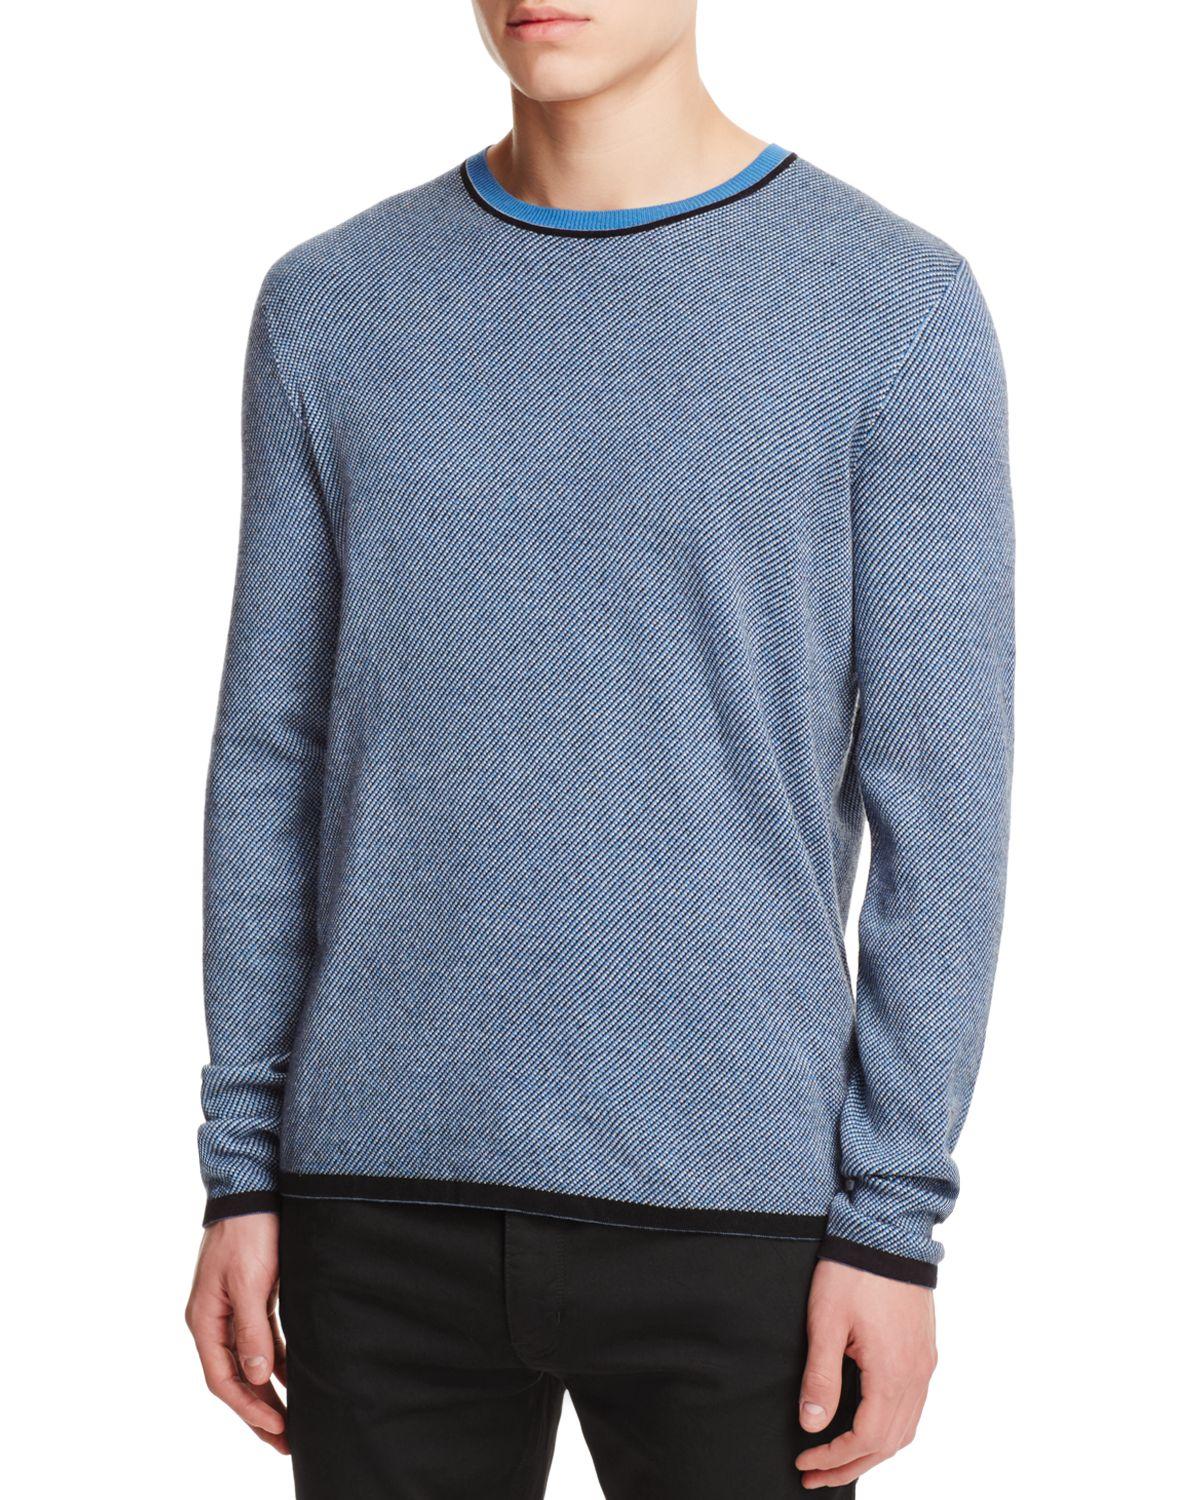 Lyst - Hugo Textured Waffle Knit Sweater in Blue for Men